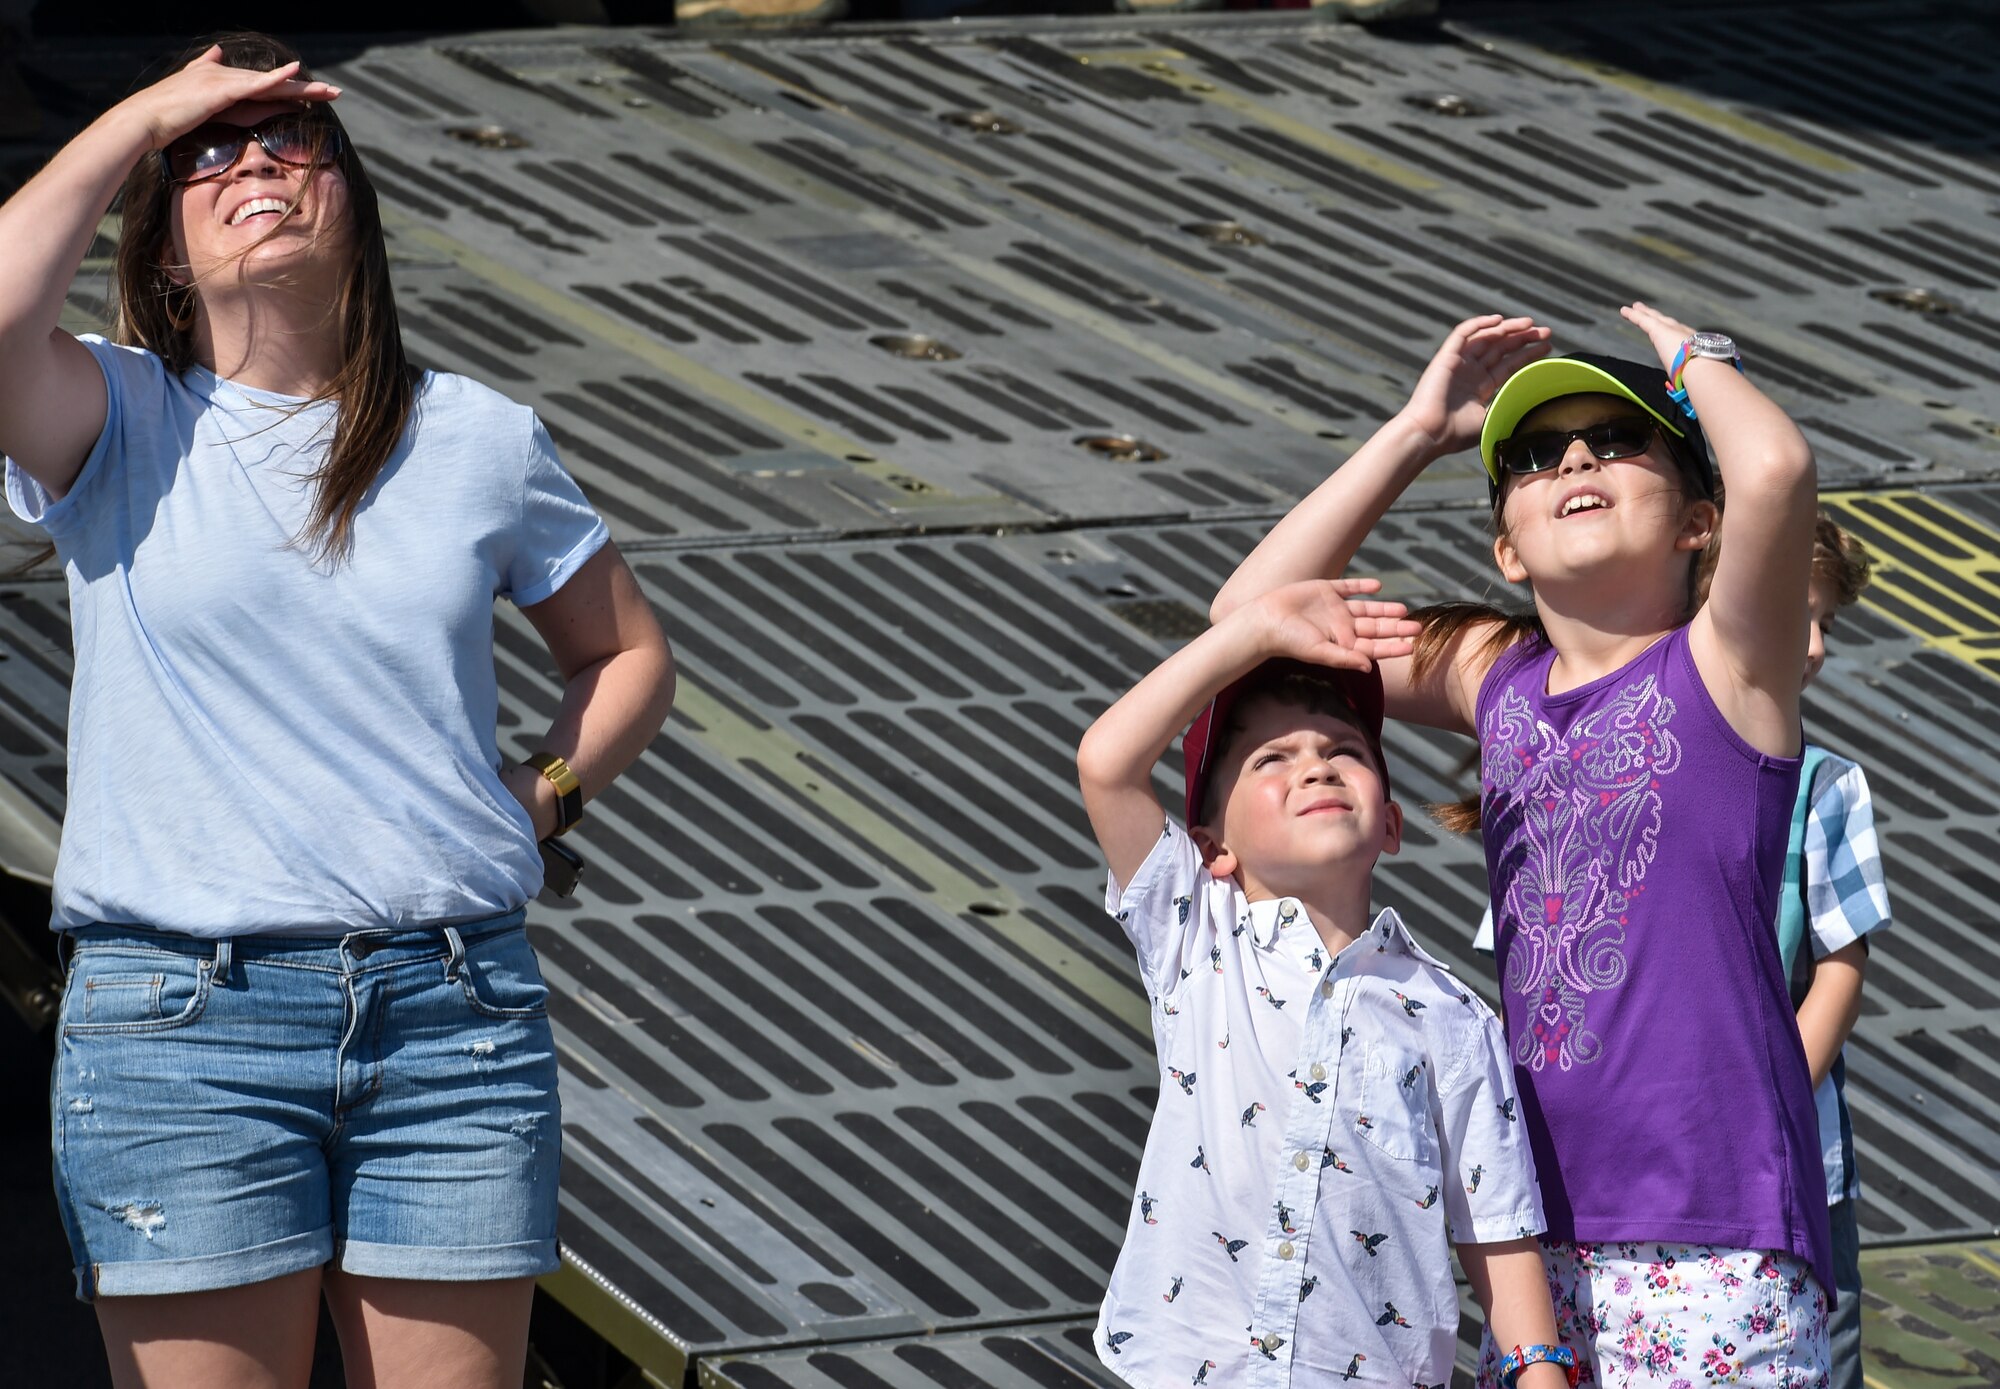 Spectators at the 2018 Air and Space Expo rehearsal watch as an aerial act flies over them at Joint Base Charleston, S.C., April 27, 2018.